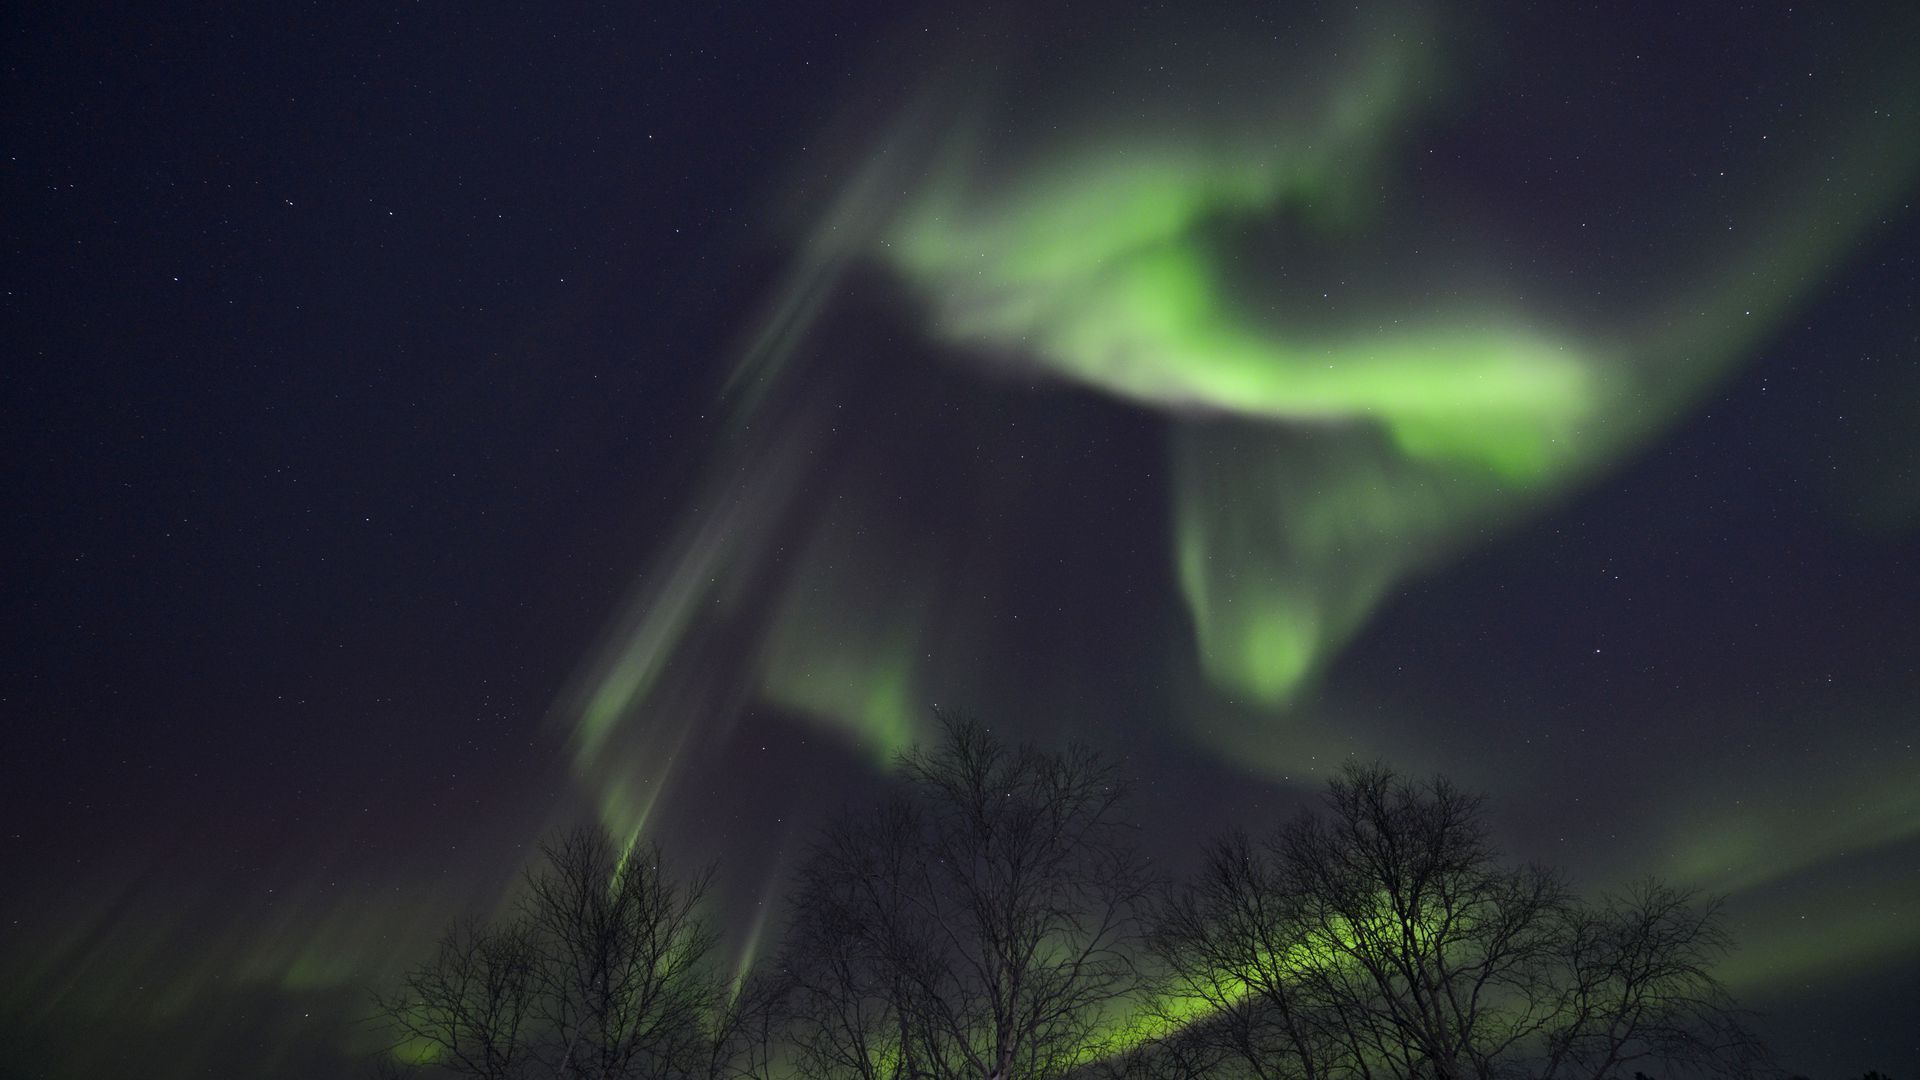 The aurora borealis — which results from disturbances in the Earth's magnosphere caused by solar winds — seen above Murmansk, Russia, last month.